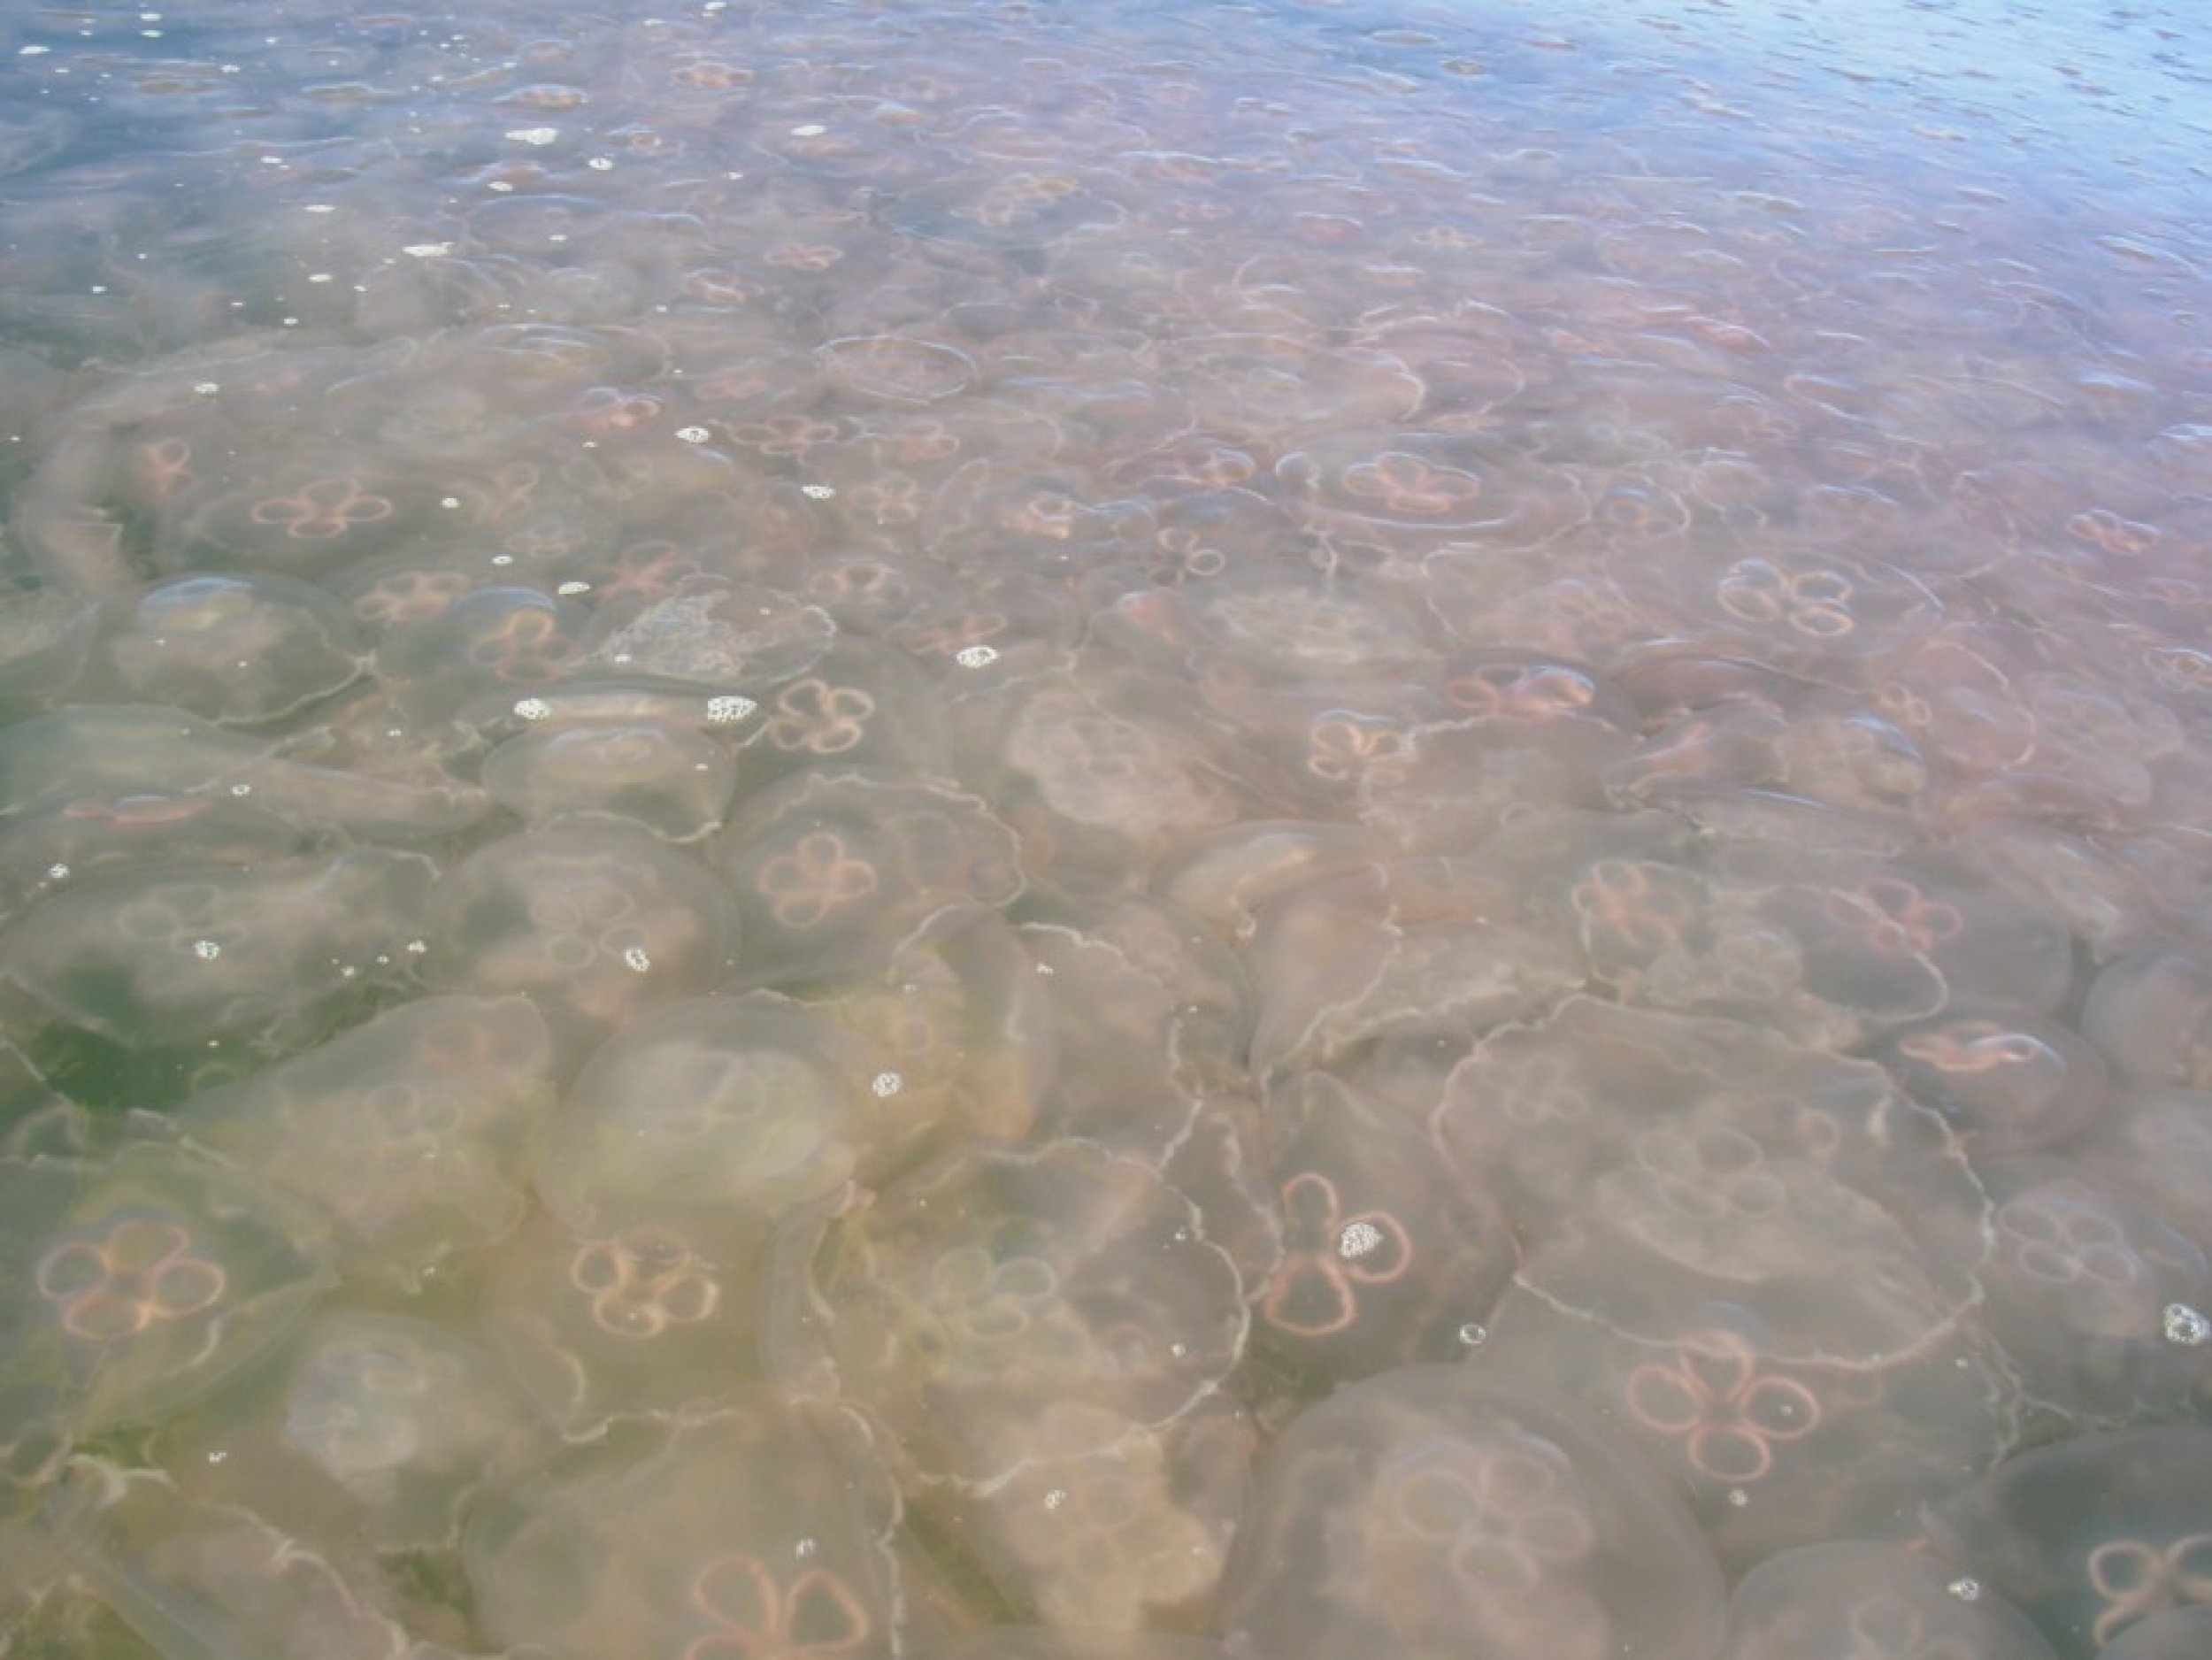 Four nuclear reactors in Japan, Israel and Scotland were forced to shutdown due to infiltration of enormous swarms of jellyfish, which clogged the seawater cooling system of the plants.